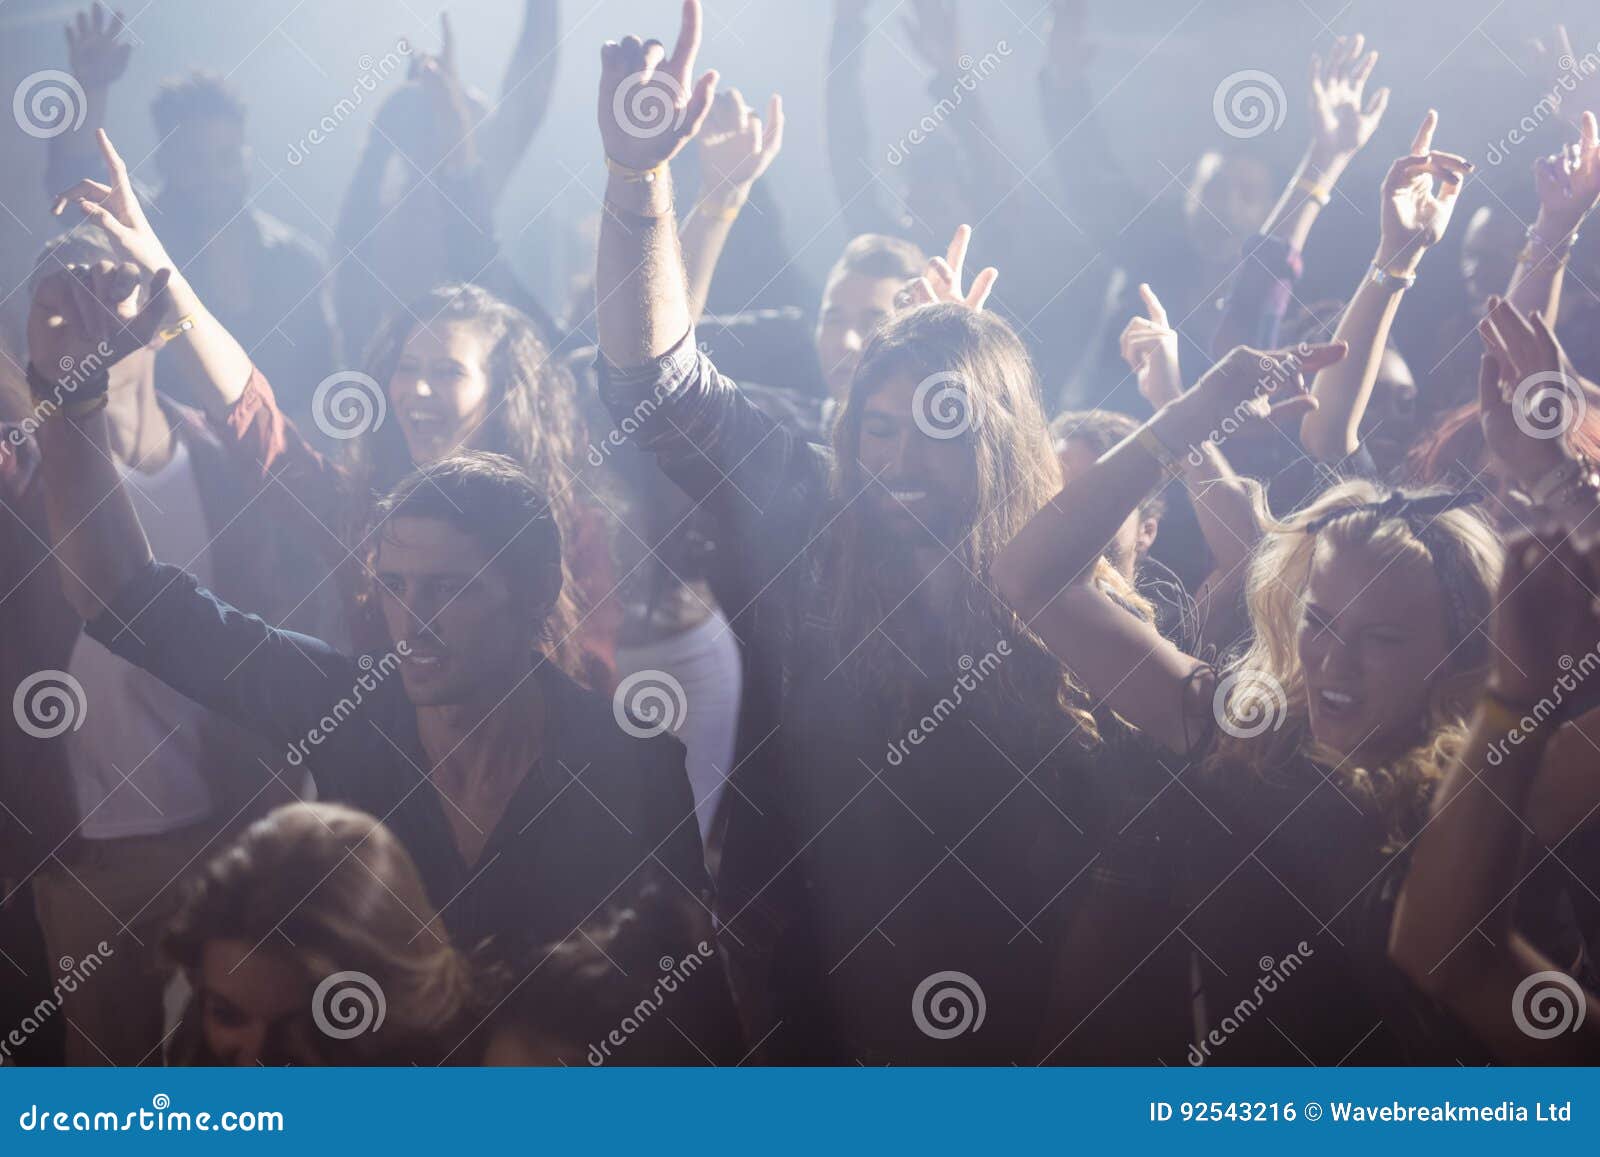 cheerful fans dancing at nightclub during music festival